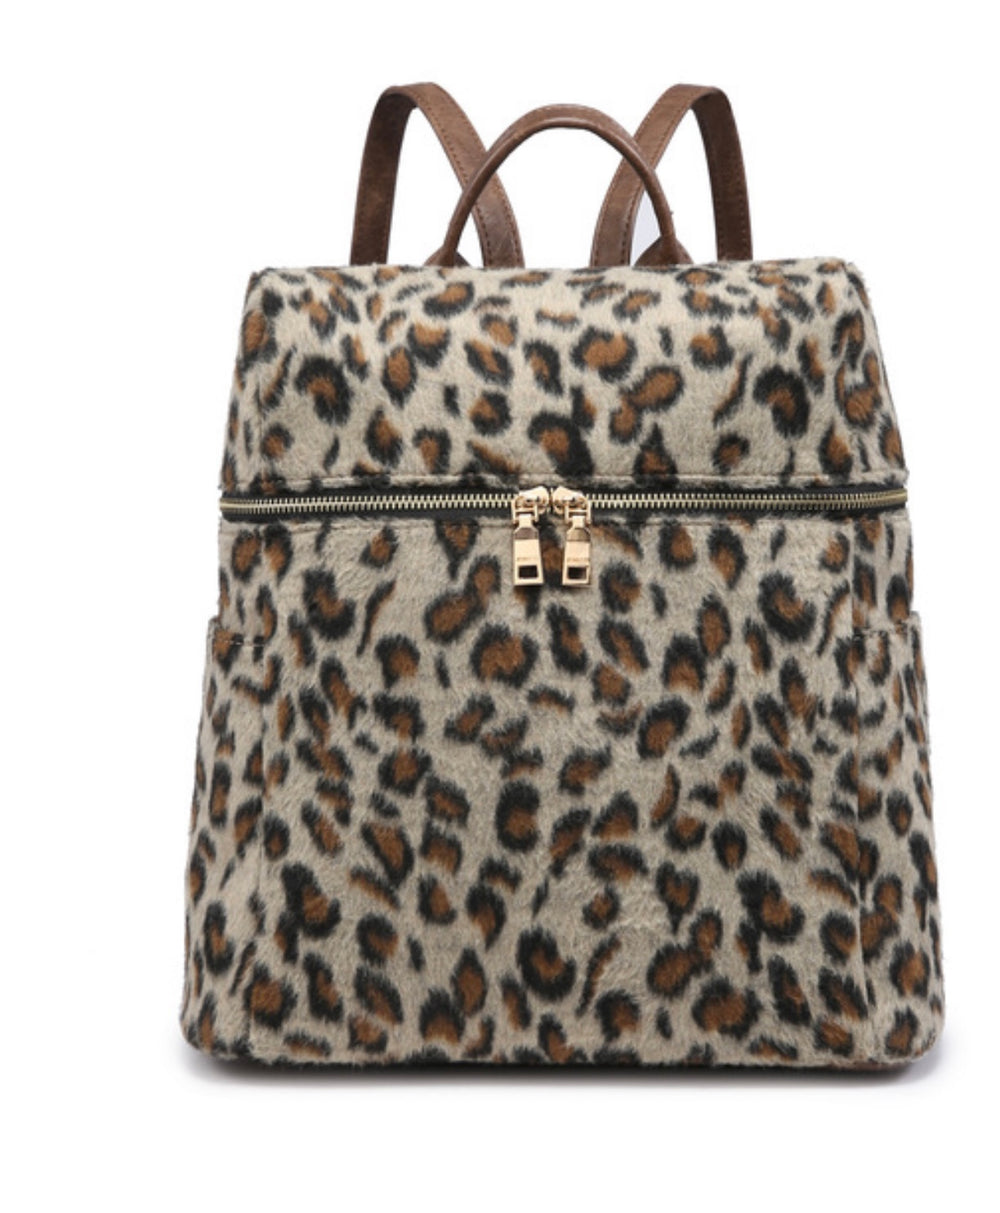 Cheetah Backpack with Two Zipper Pockets